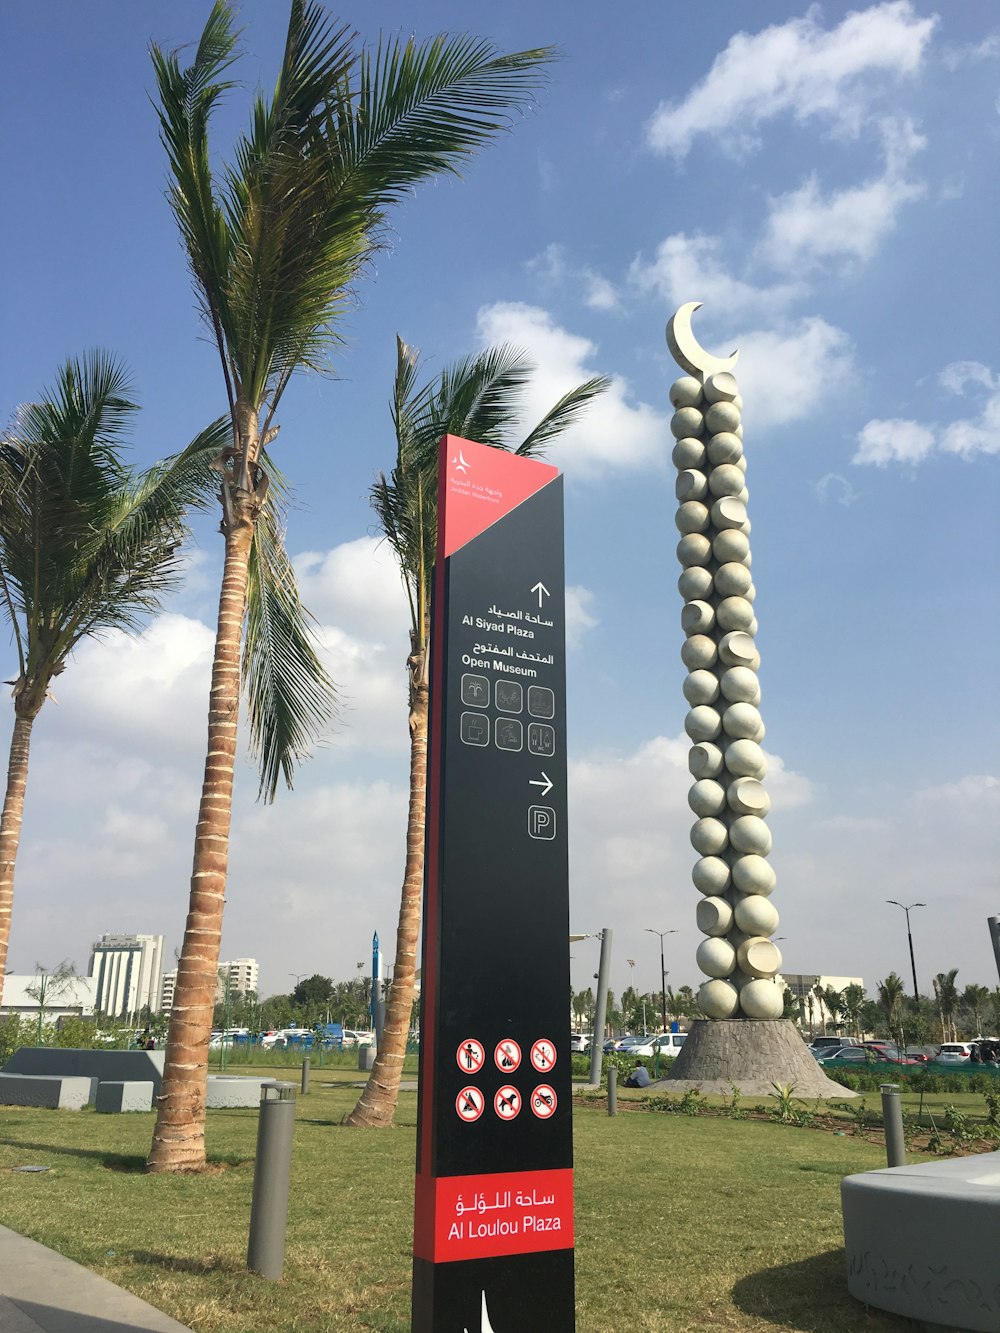 a sign in front of some palm trees